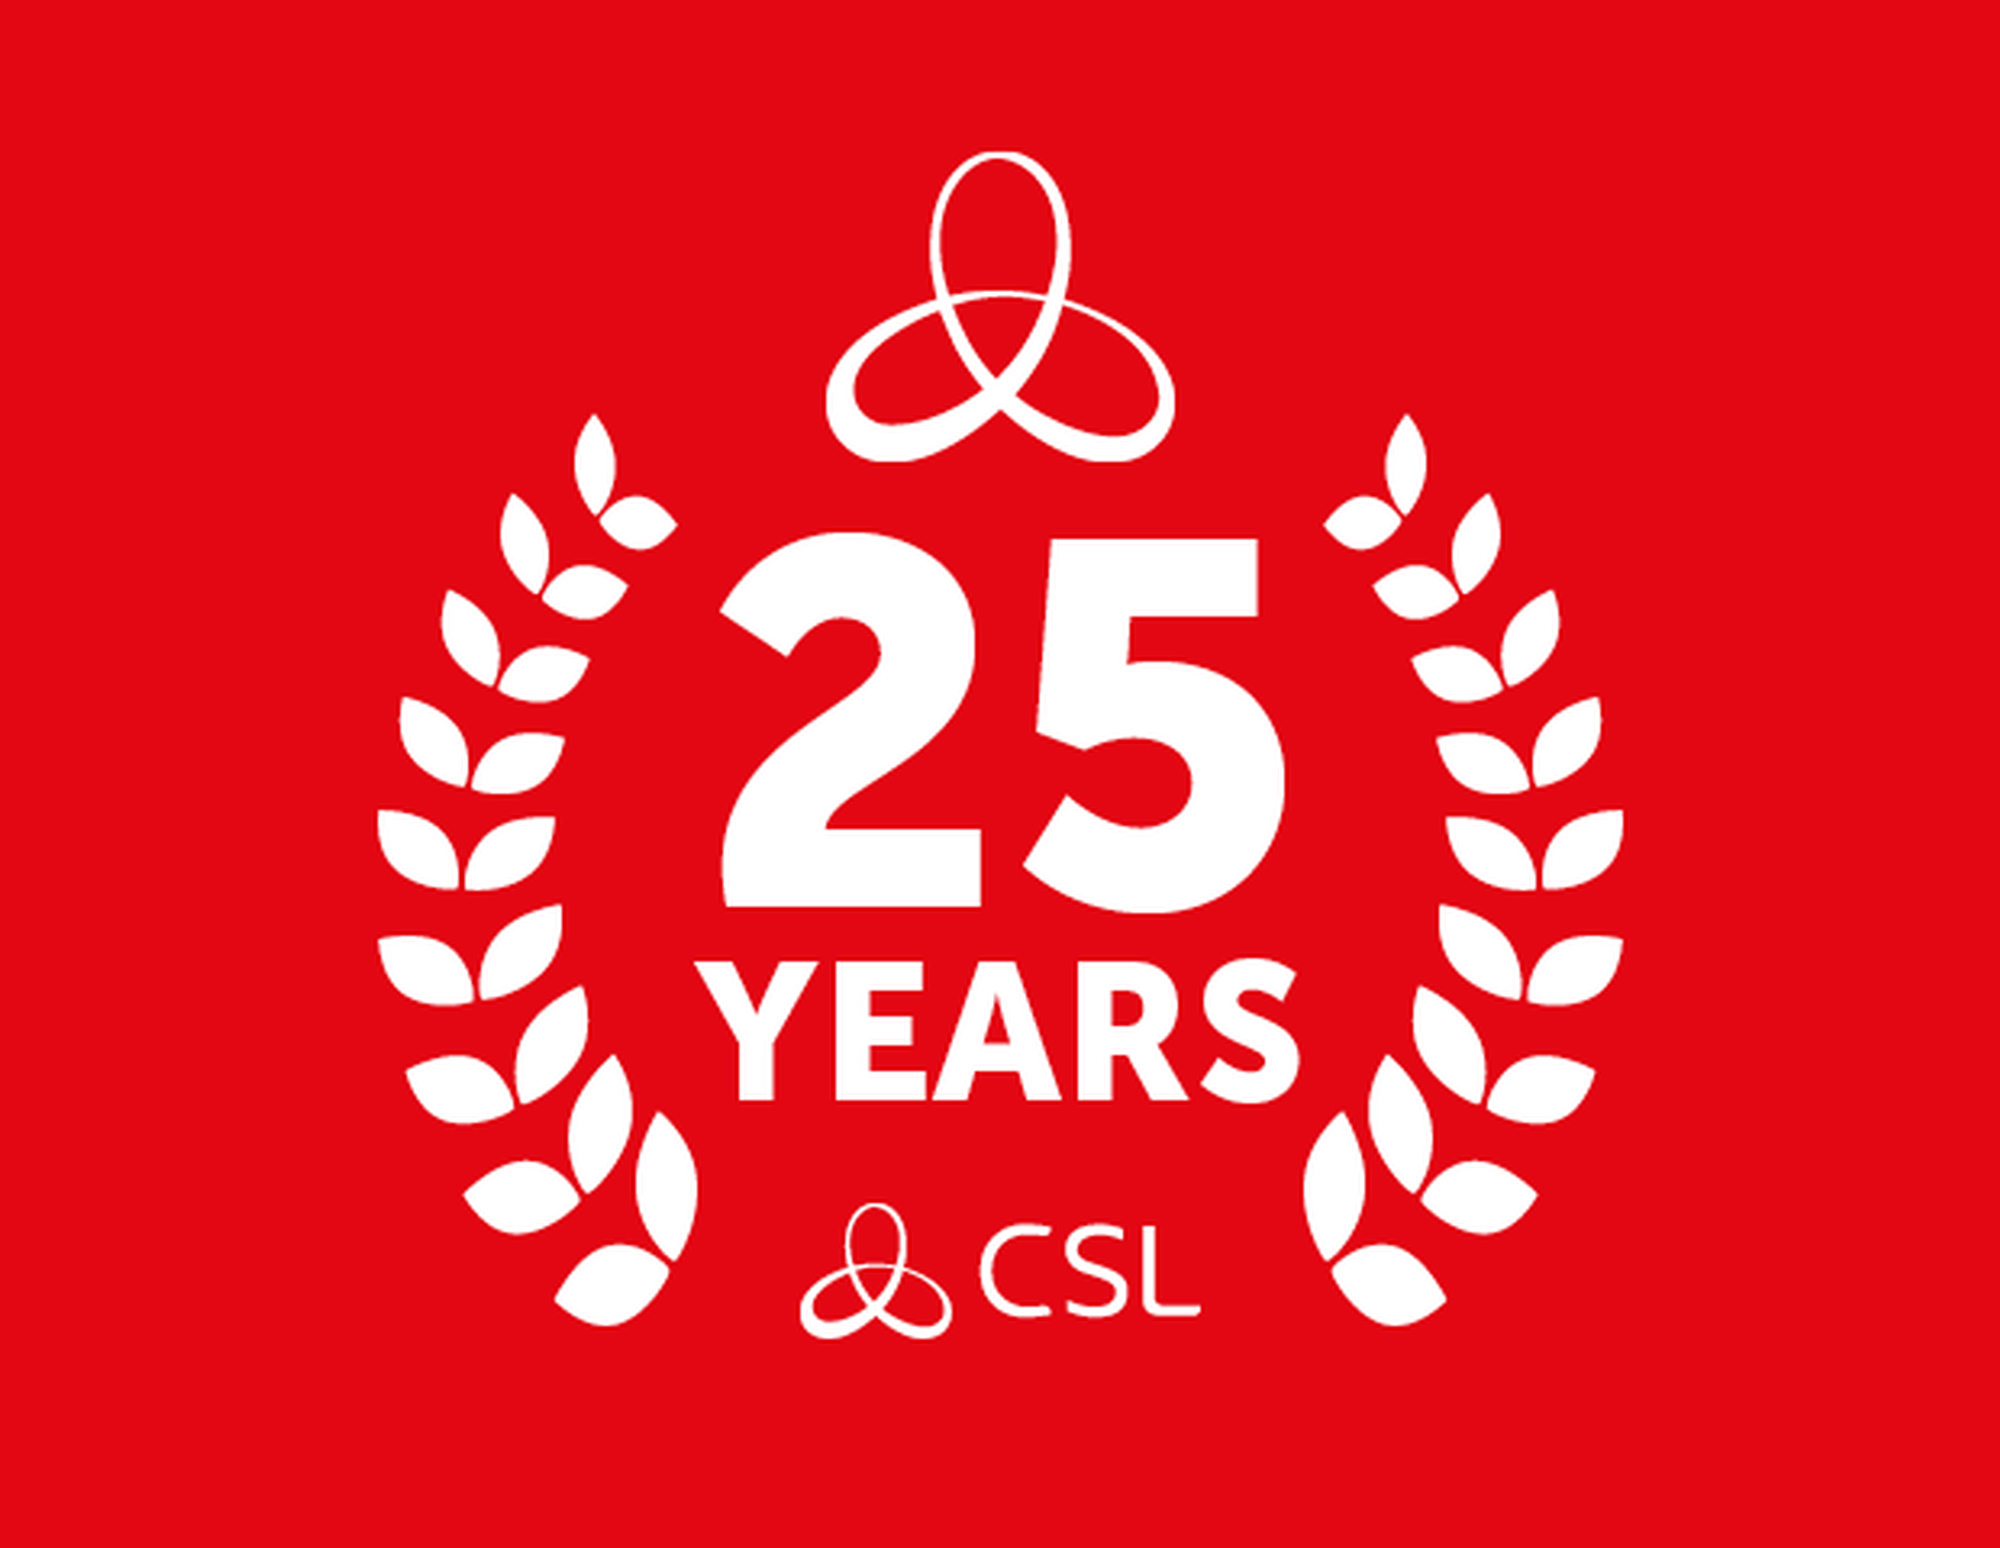 This year we are celebrating CSL's 25th Anniversary!